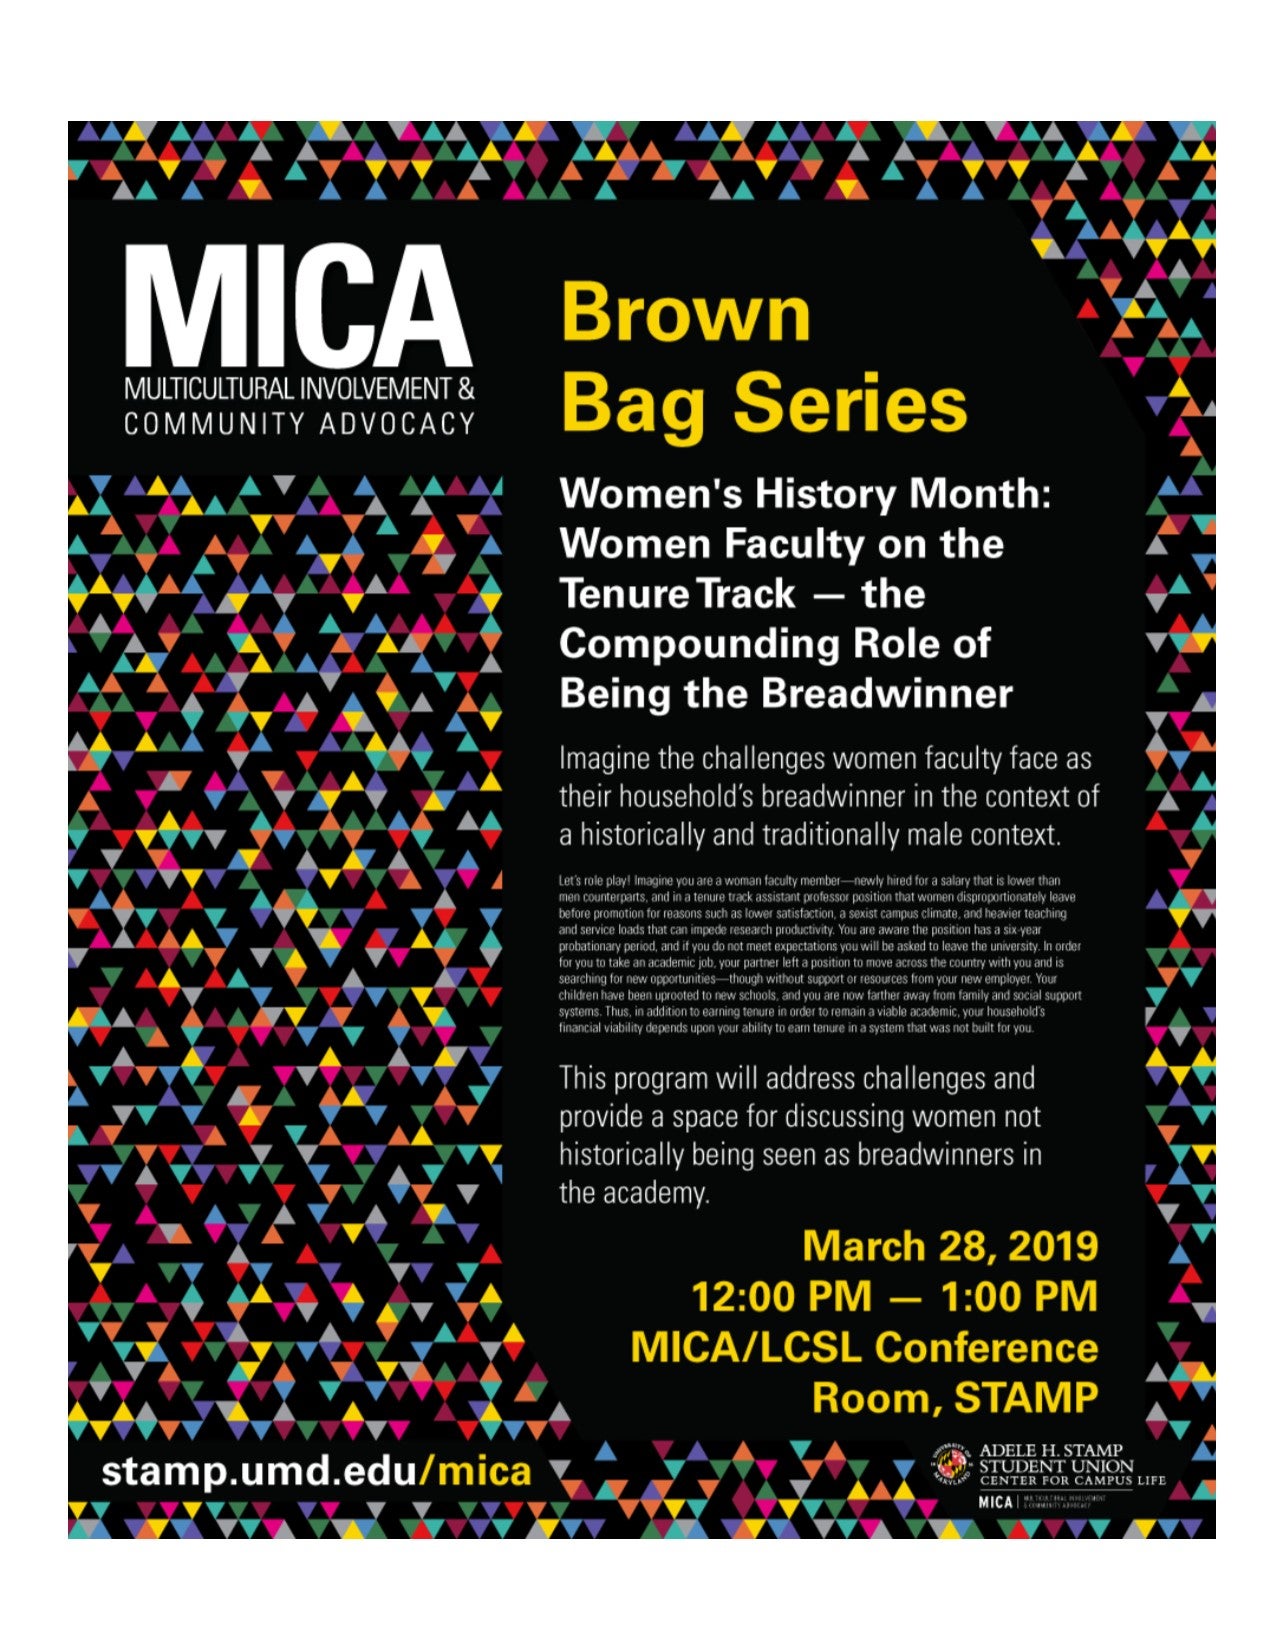 MICA Brown Bag Women Faculty on the Tenure Track - Description and Details of Event